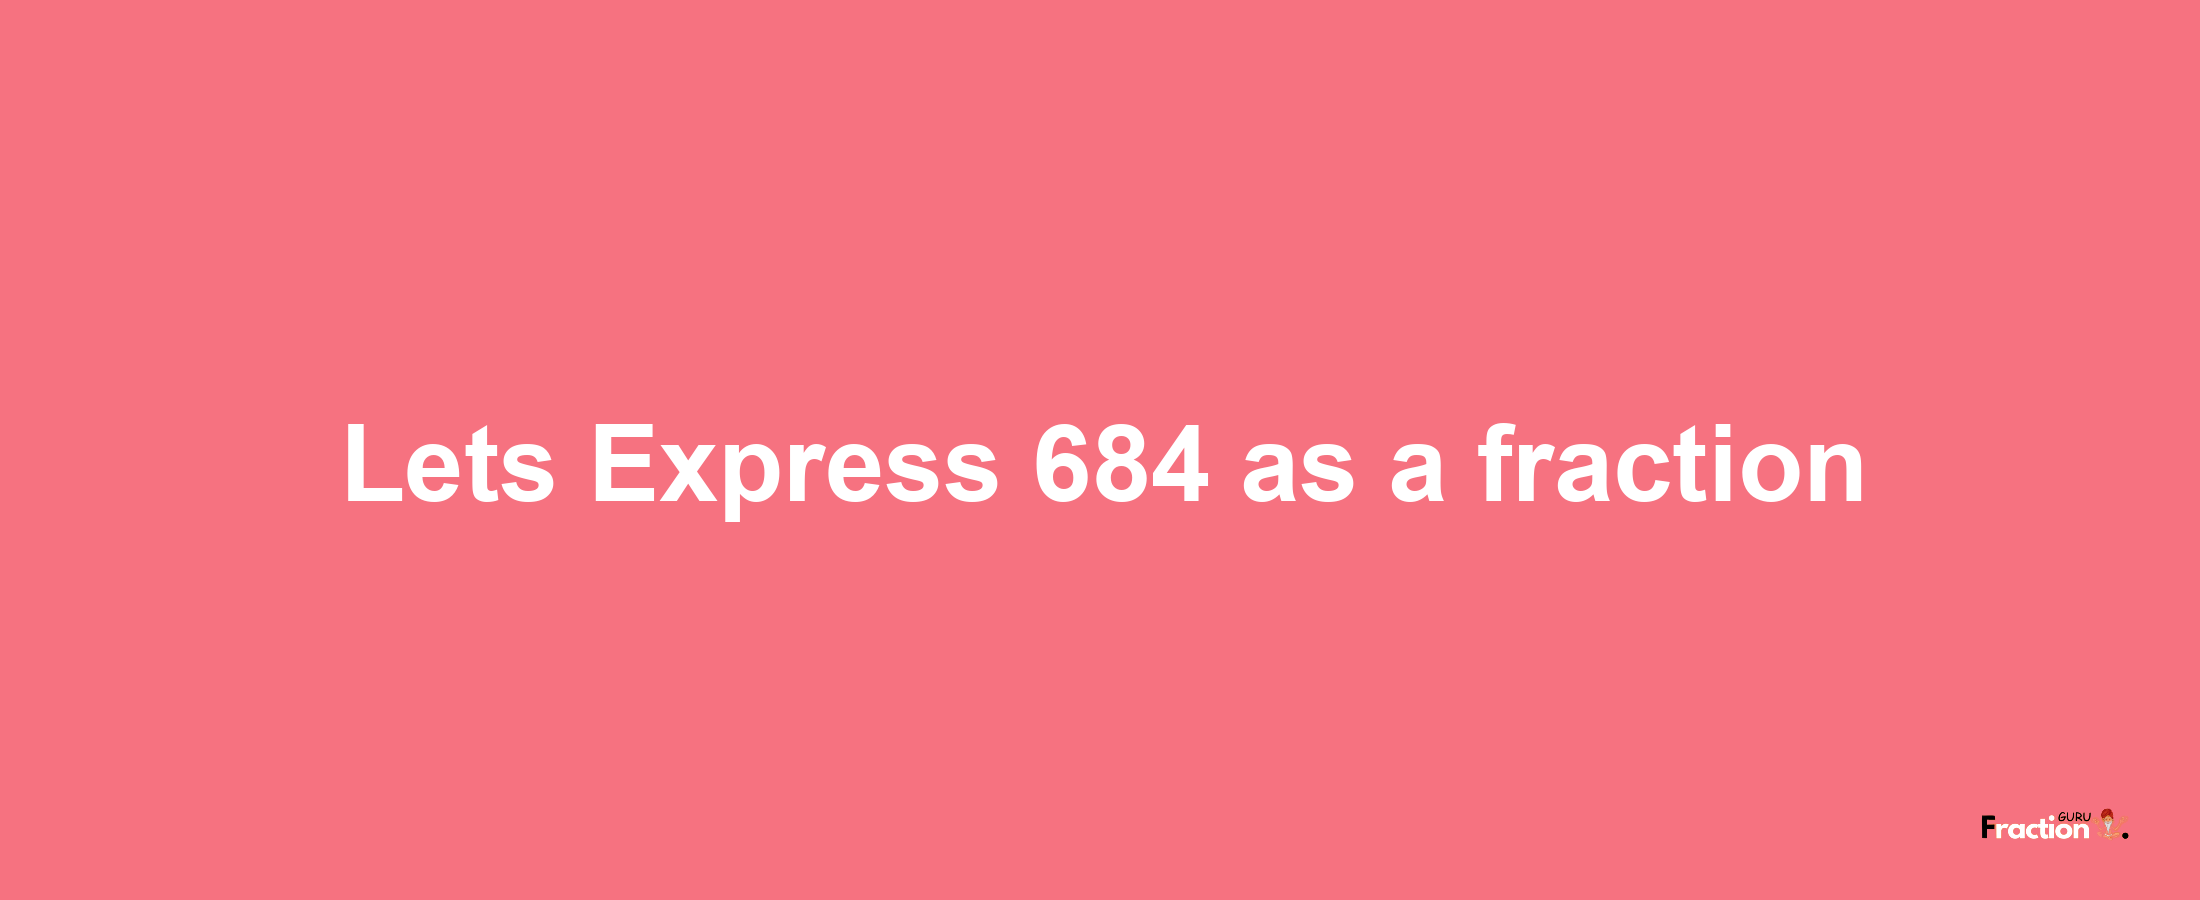 Lets Express 684 as afraction